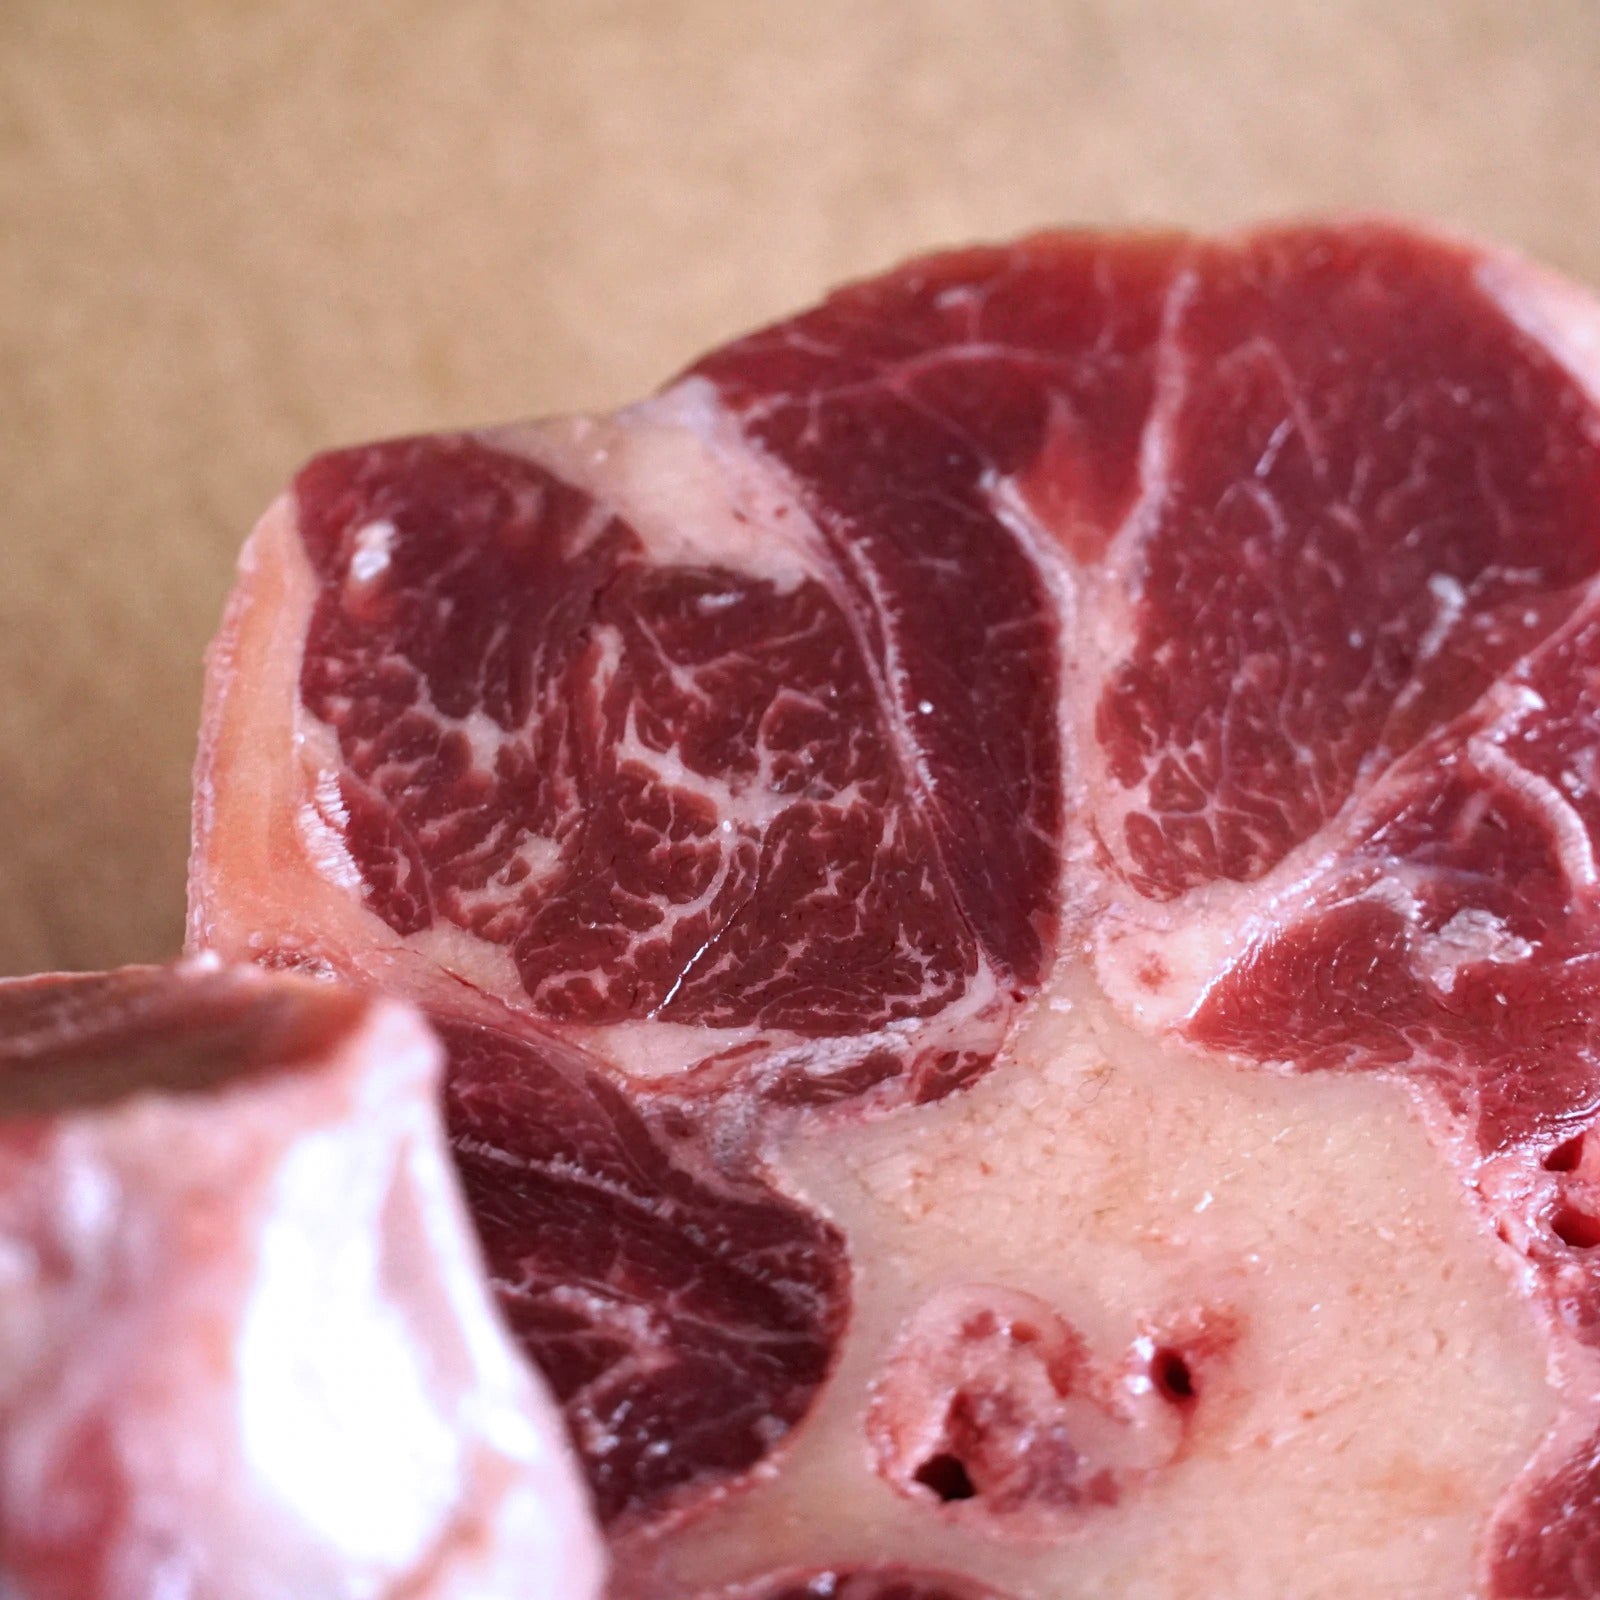 Grass-Fed Beef Oxtail / Tail Cuts (500g) - Horizon Farms